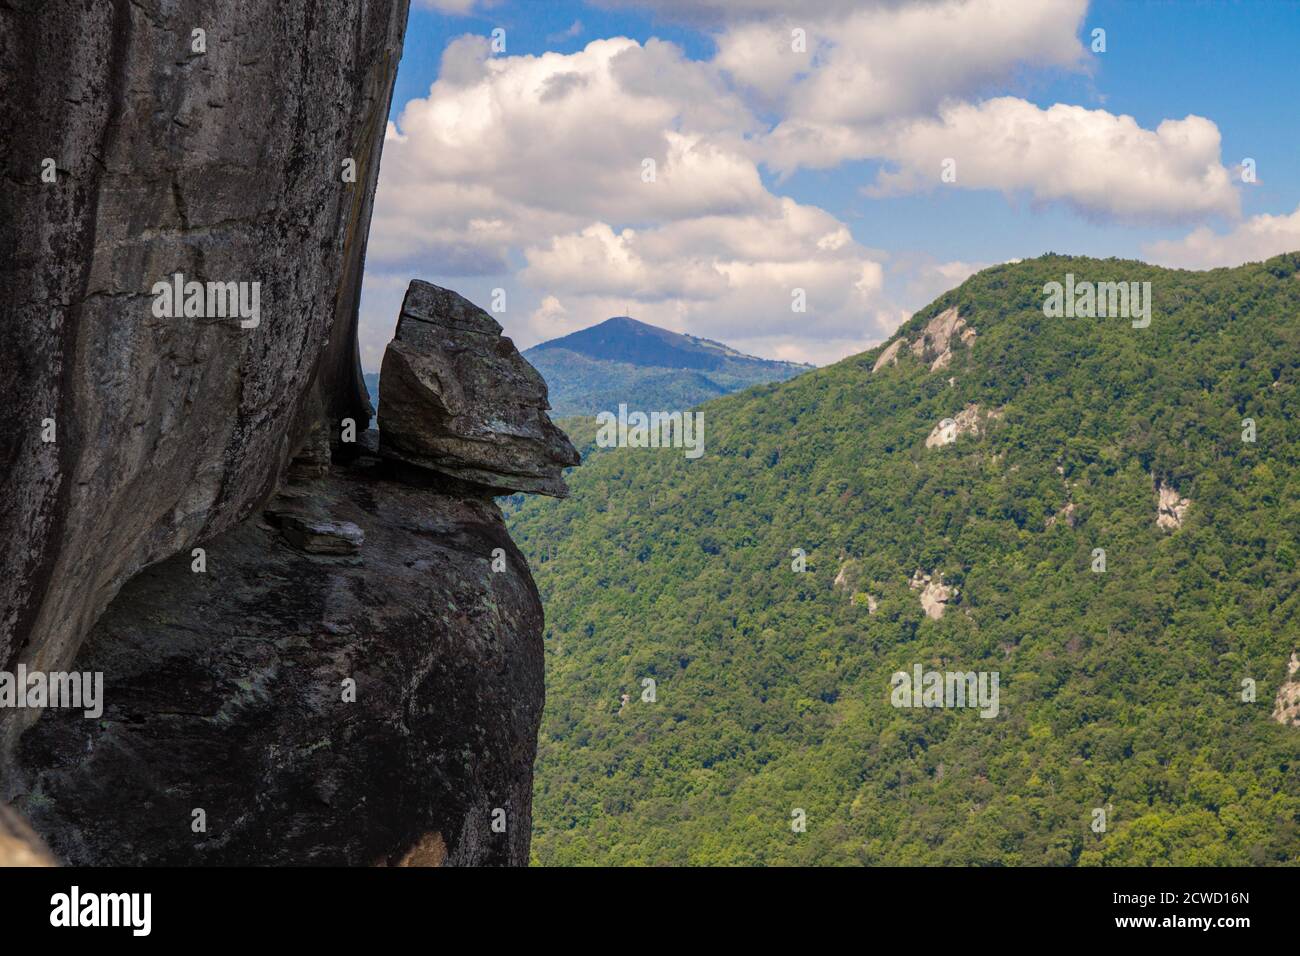 Devils Head rock on the edge a steep cliff at Chimney Rock State Park in the Appalachian Mountains of North Carolina. Stock Photo